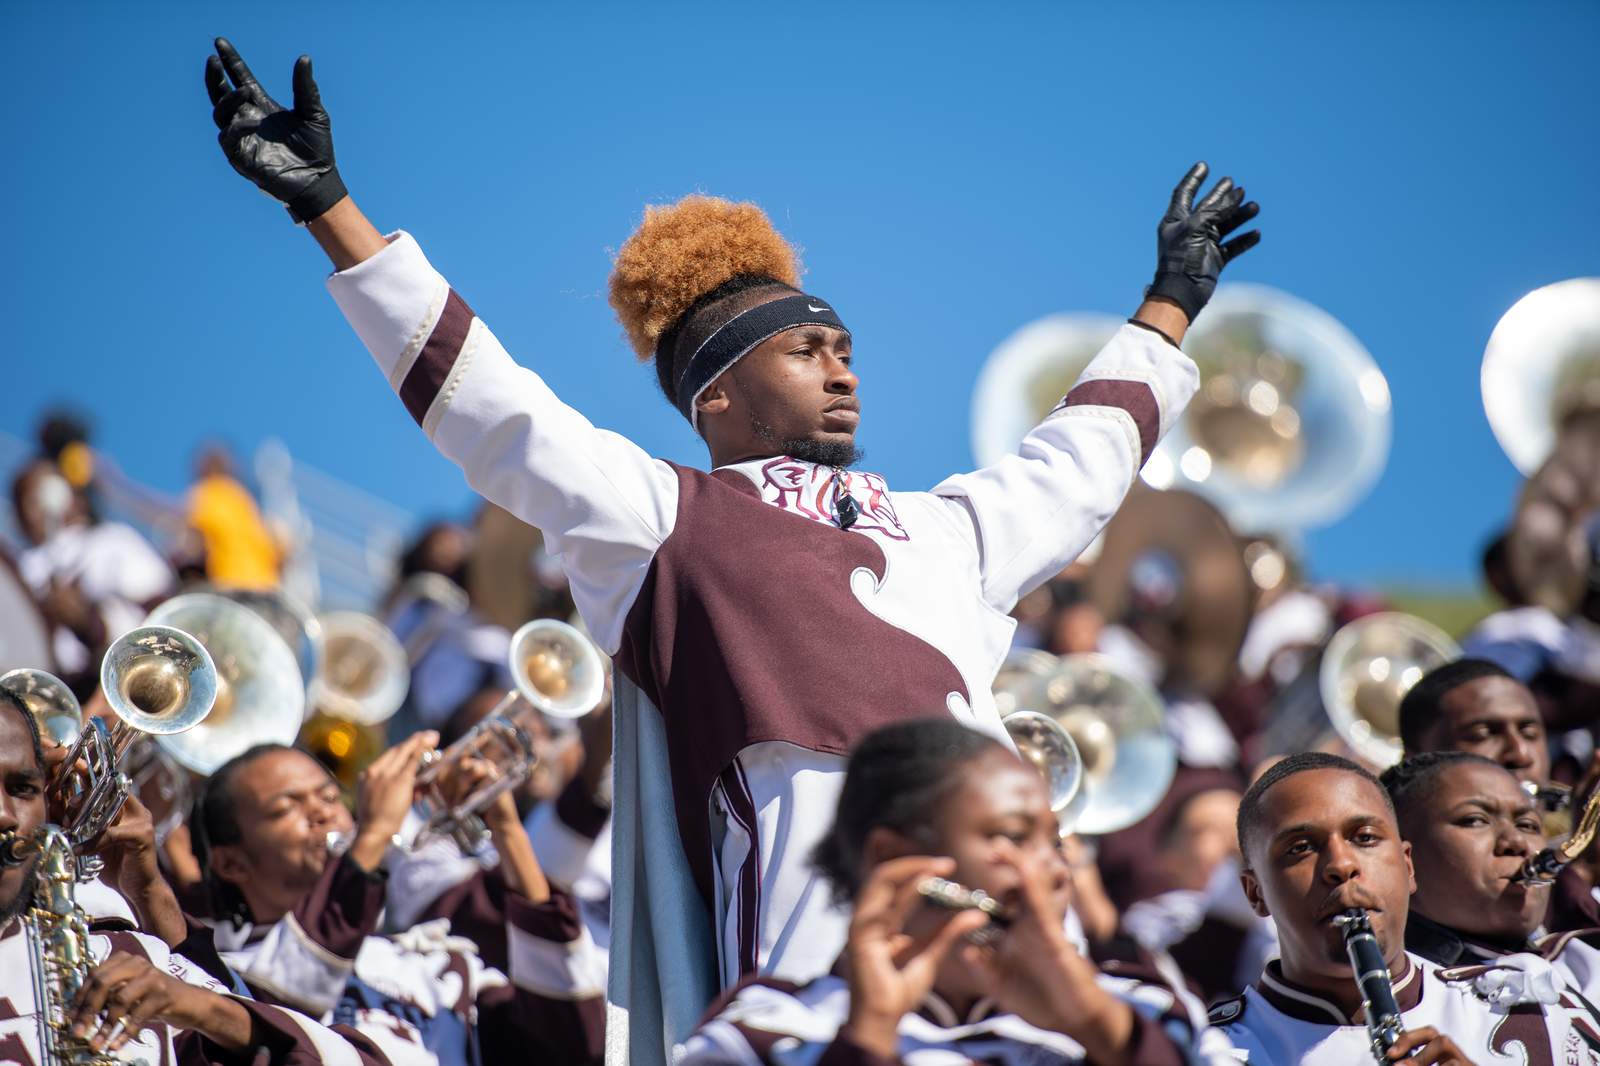 The Ocean of Soul marching band’s rich history